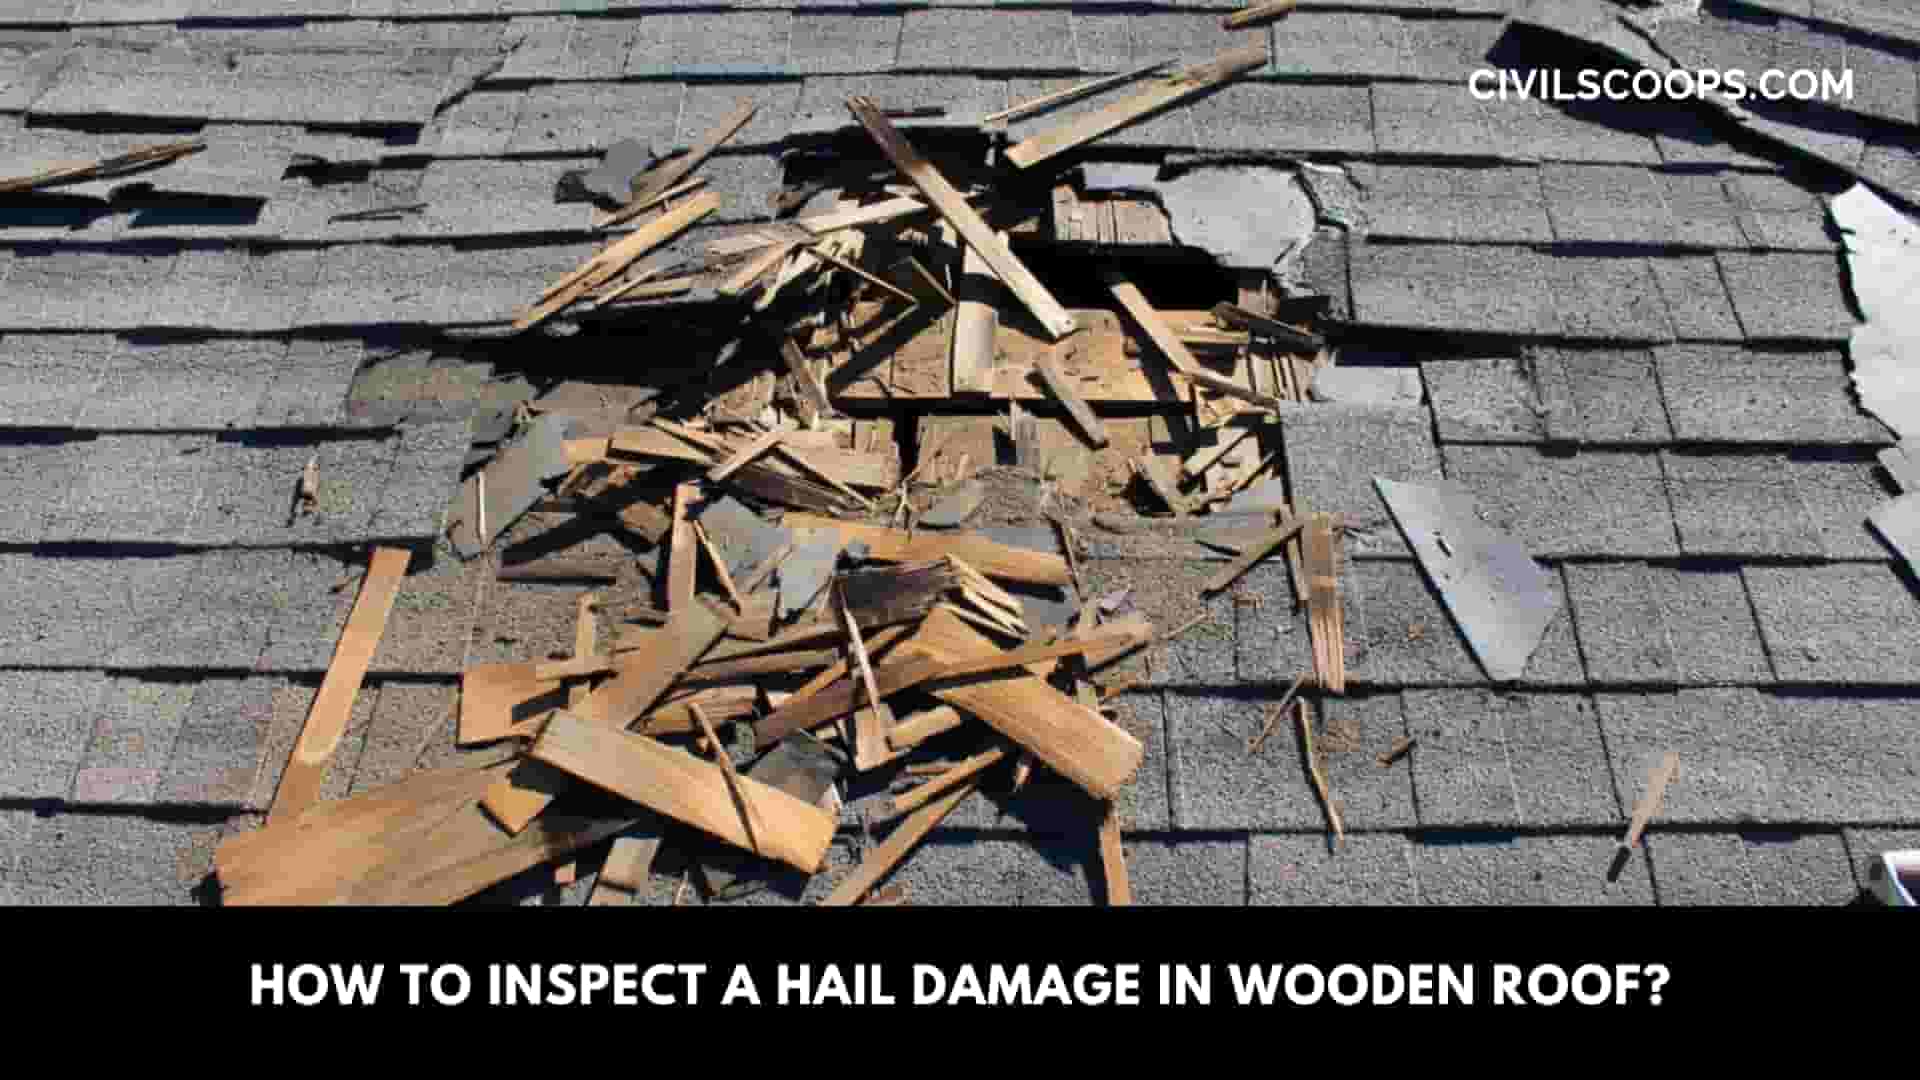 How to Inspect a Hail Damage in Wooden Roof?